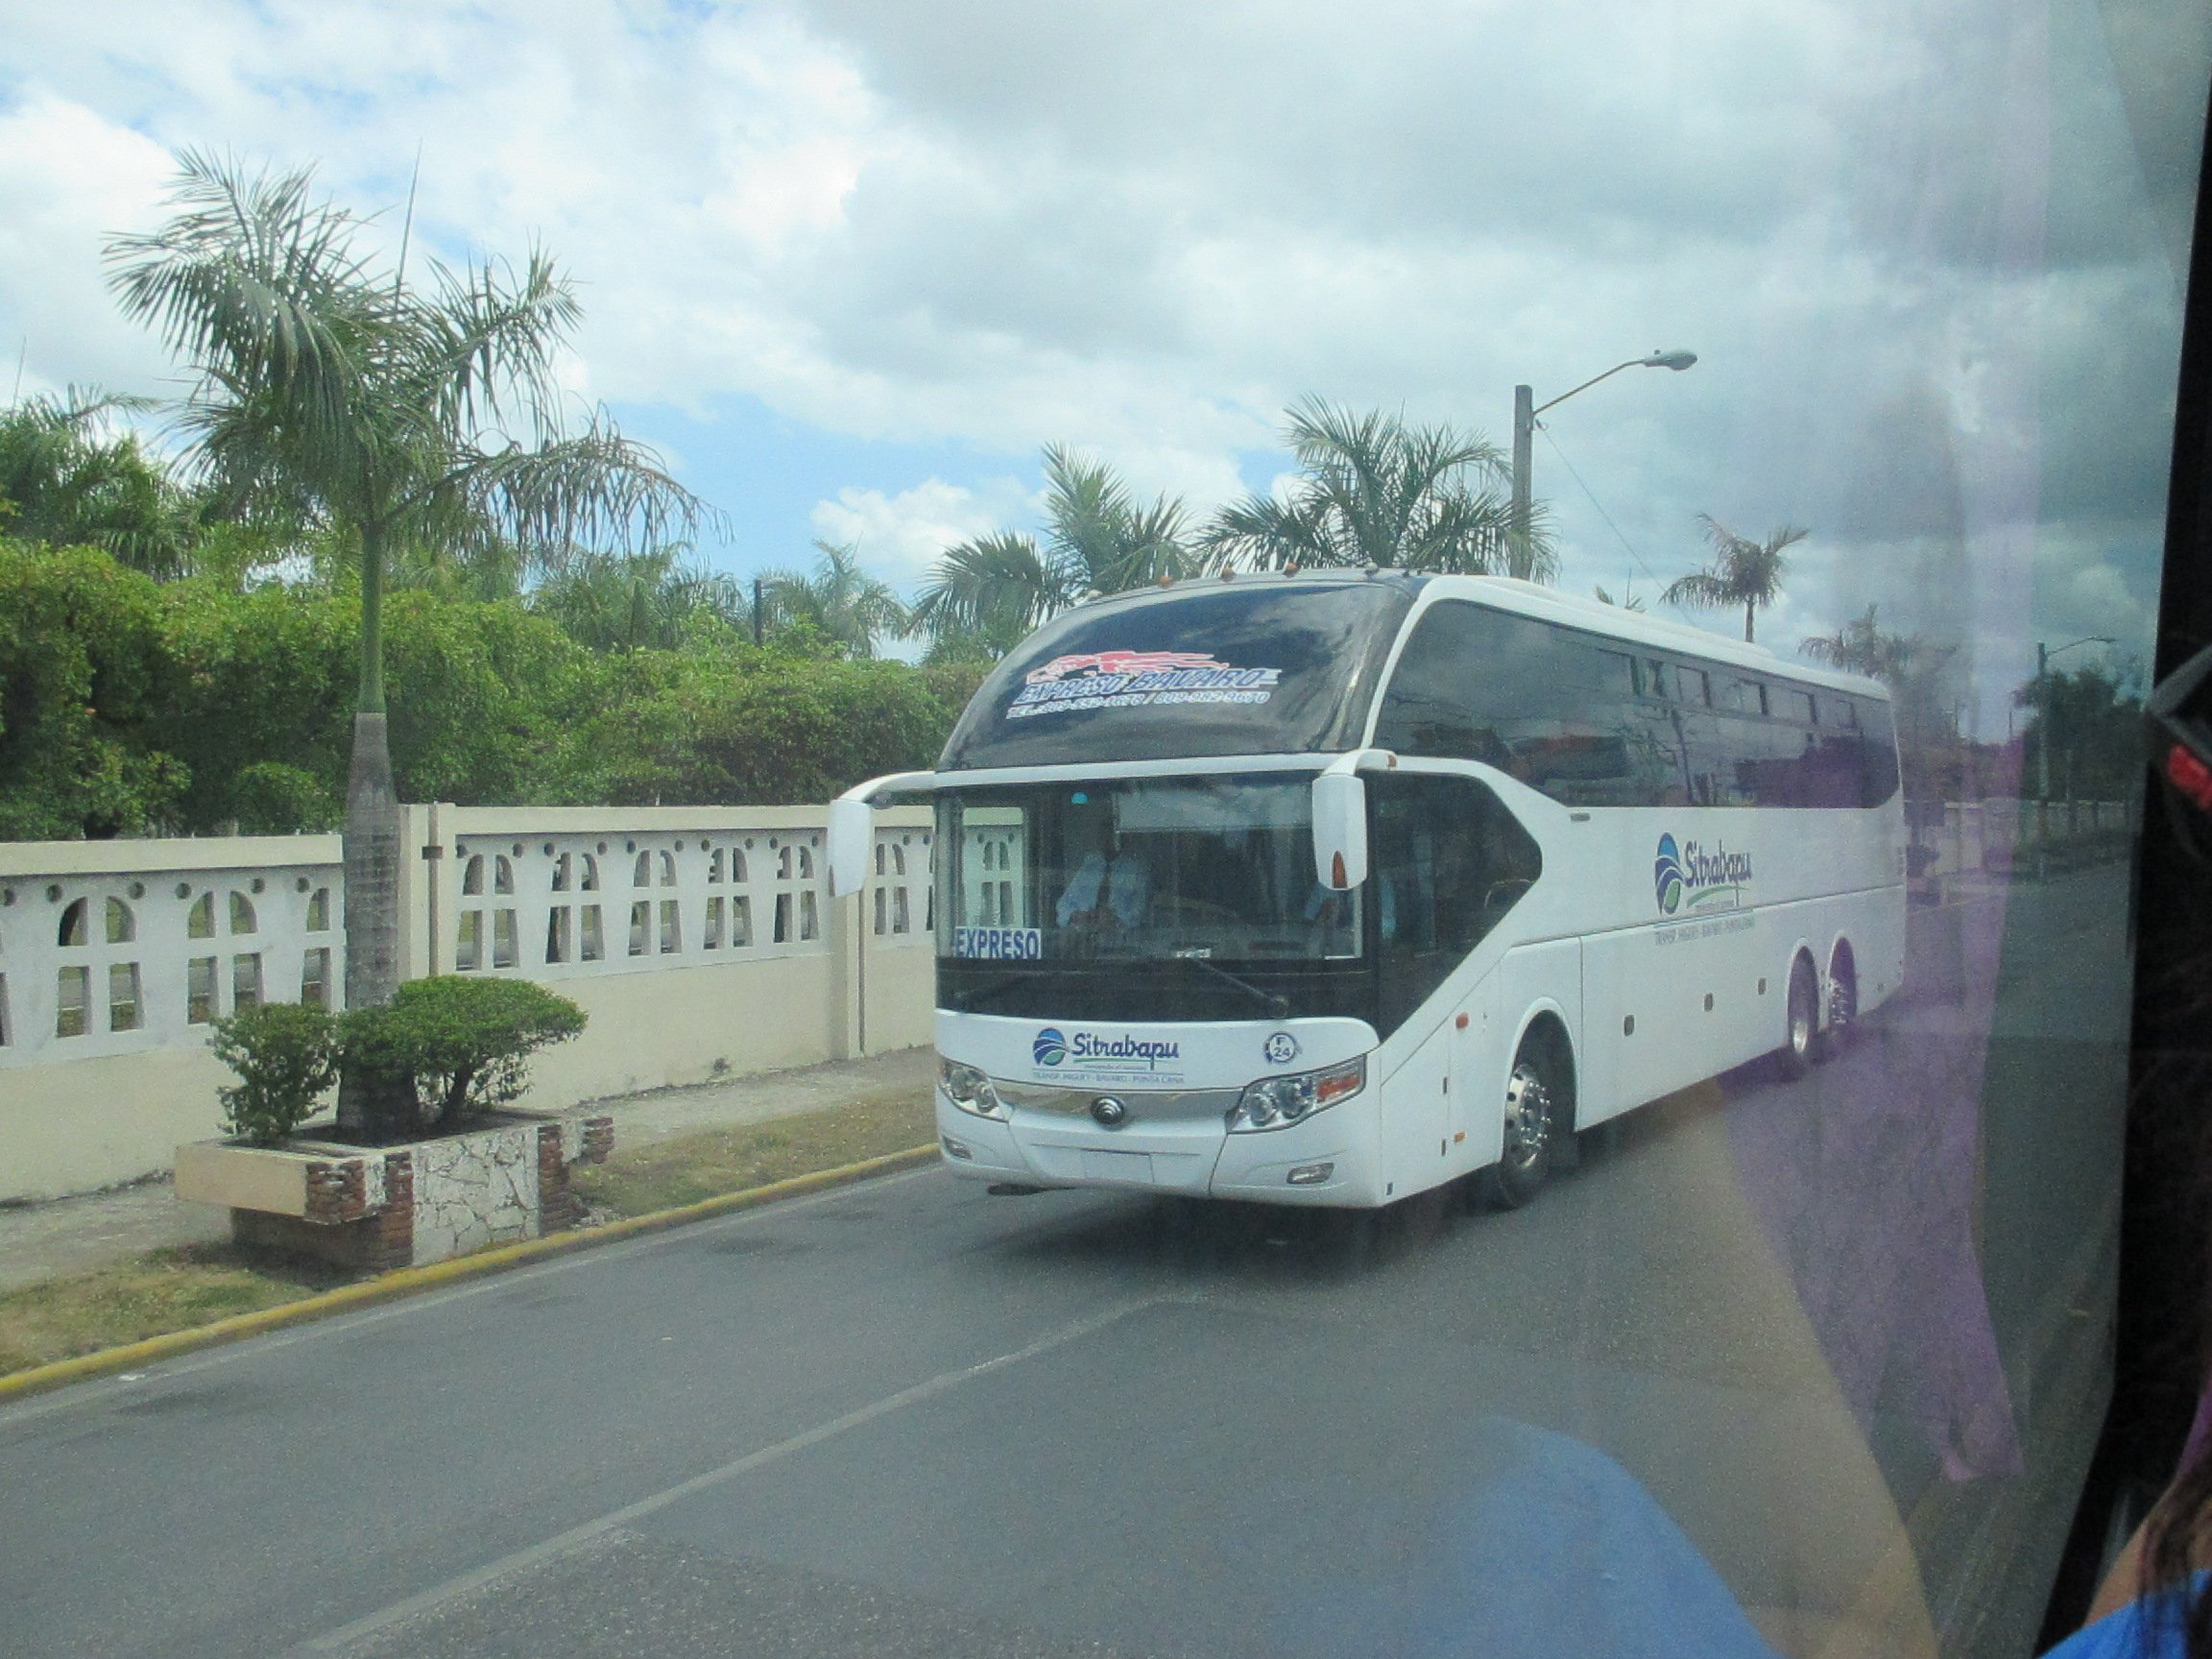 How To Get From Puerto Plata to Punta Cana Airport - All Possible Ways, cheapest way from Puerto Plata to Punta Cana, Puerto Plata to Punta Cana, Puerto Plata to Punta Cana bus, Puerto Plata to Punta Cana Airport, Caribe Tours Puerto Plata